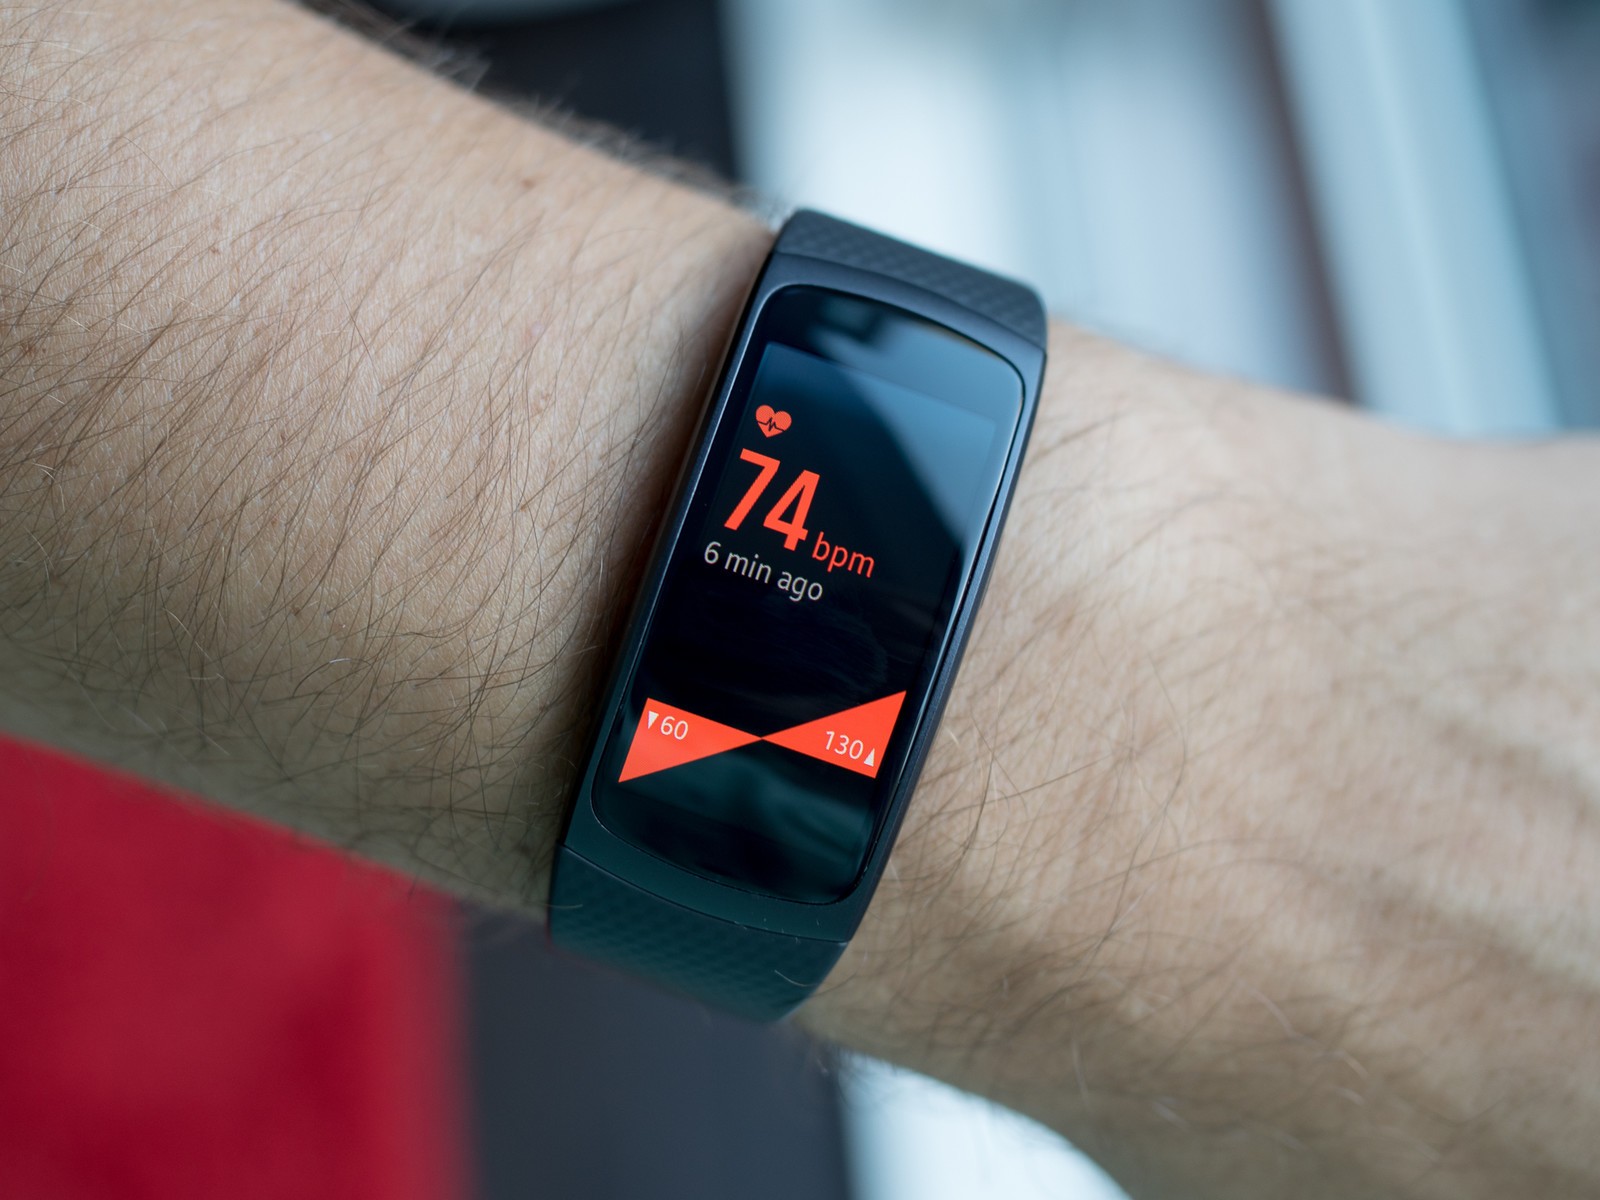 Samsung Gear Fit 2 Update Brings Continuous Heart Rate - Samsung Gear S2 Pro , HD Wallpaper & Backgrounds